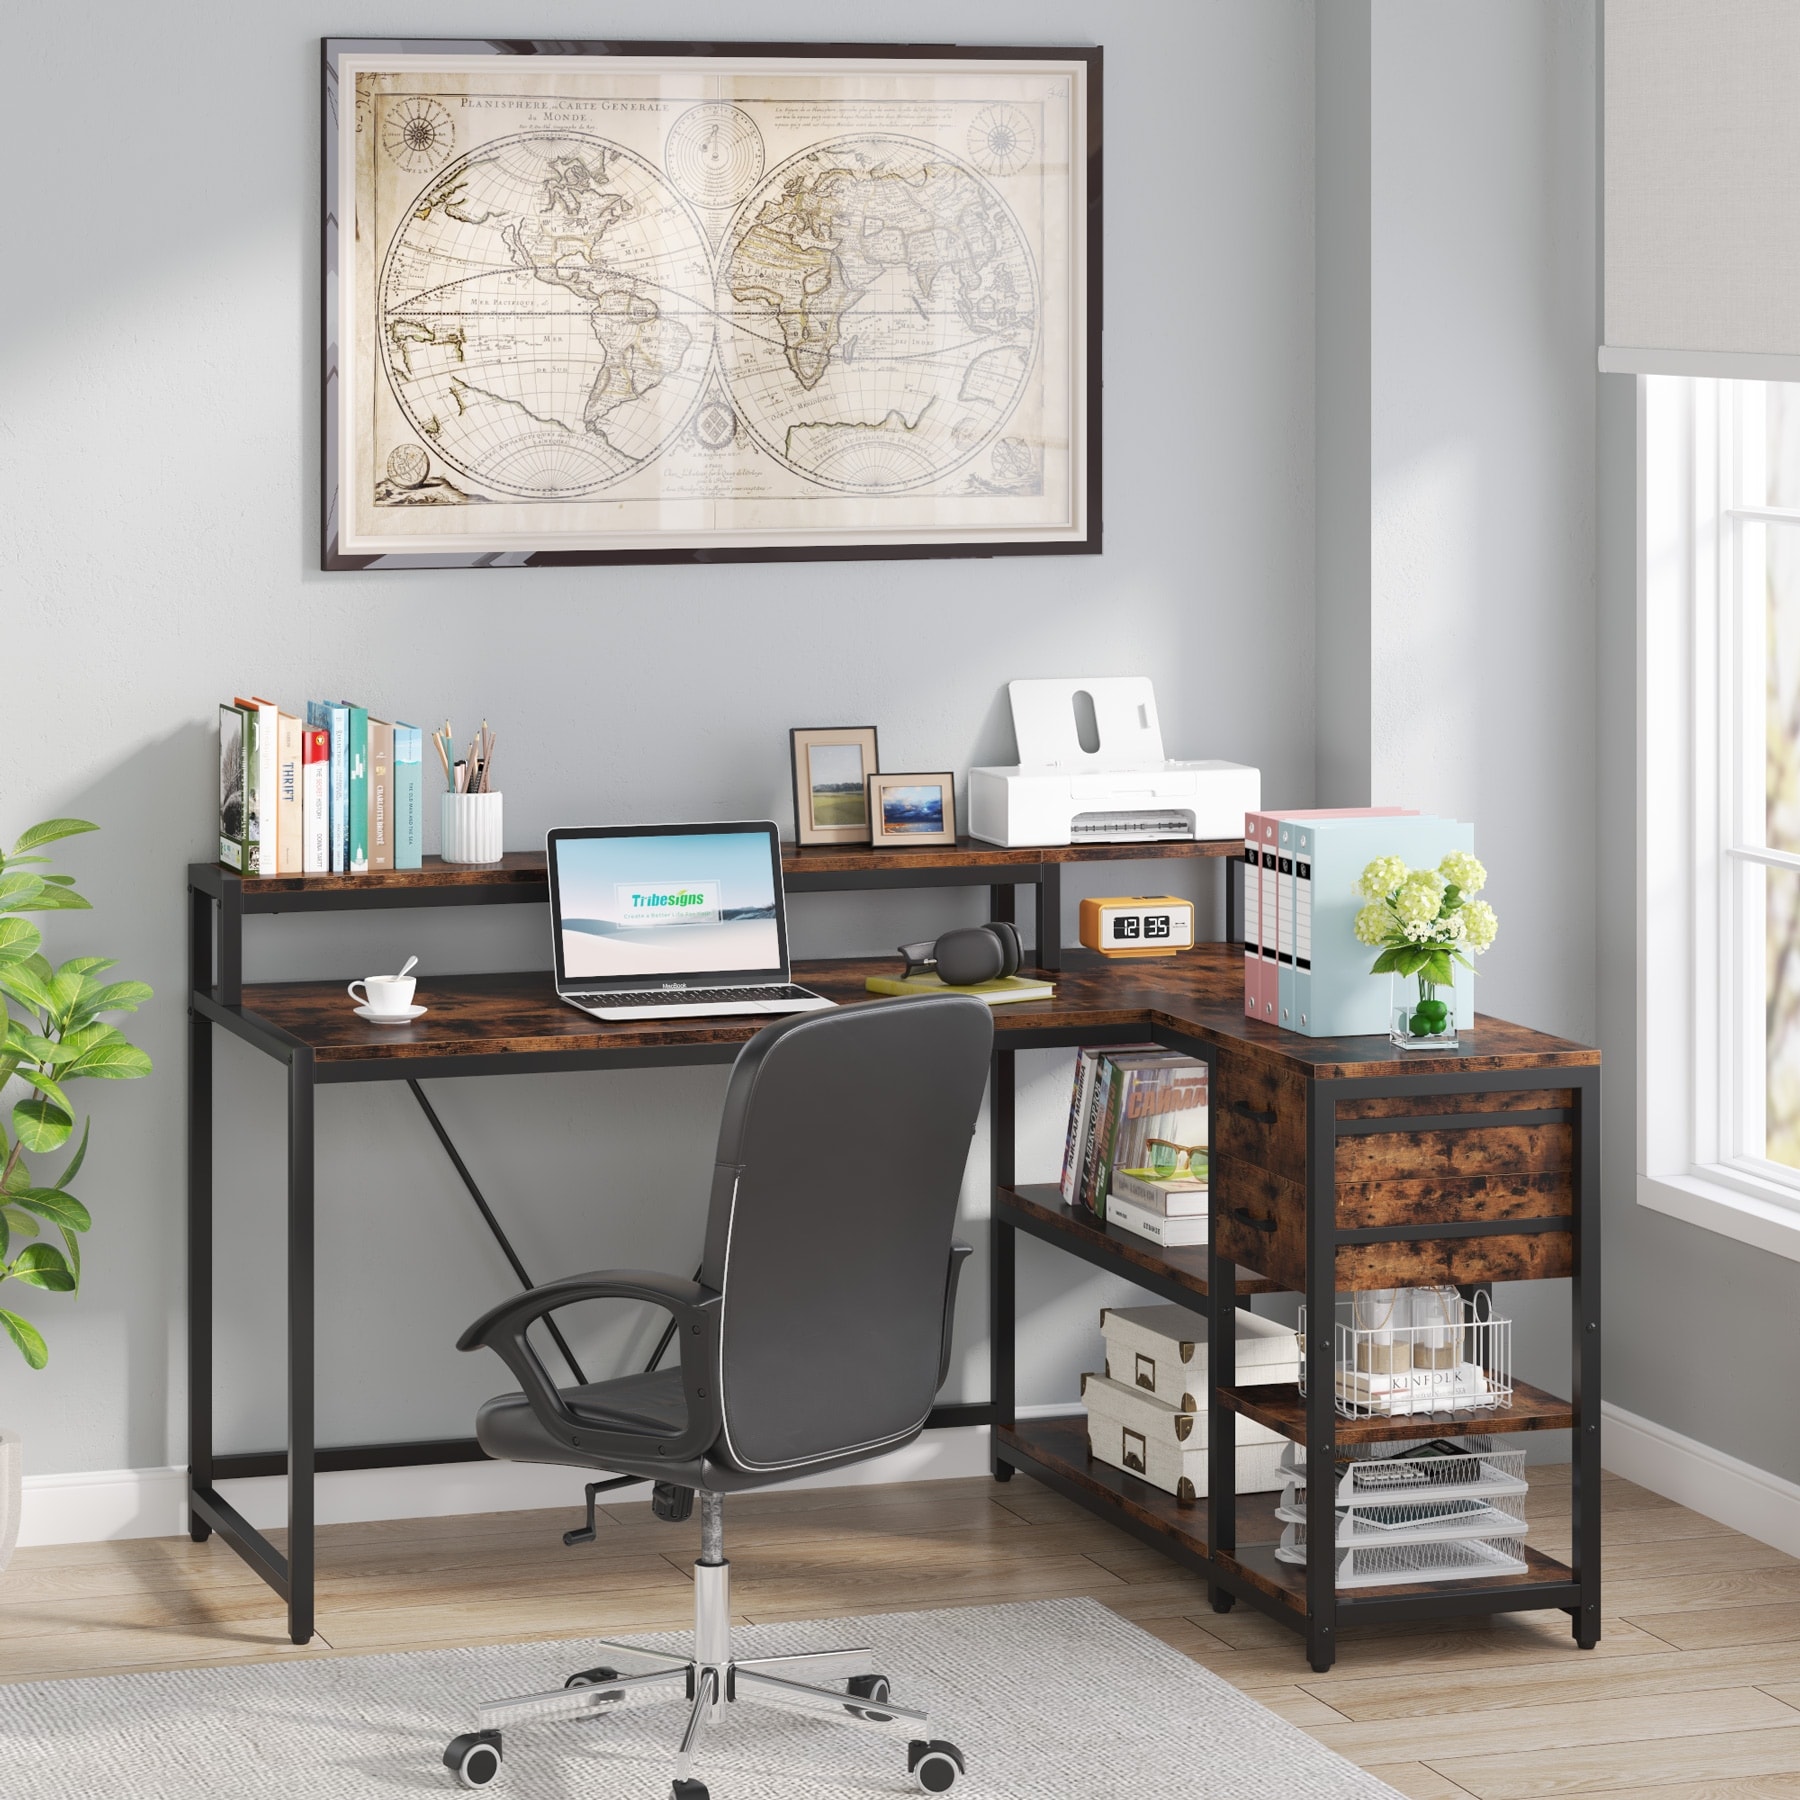 https://ak1.ostkcdn.com/images/products/is/images/direct/cc08ac1ecddfec5a97fefe46236c26dd09679fdd/L-Shaped-Desk-with-Drawer%2C-Home-Office-Corner-Desk-with-Storage-Shelves-and-Monitor-Stand%2C-Rustic-PC-Desk-for-Small-Space.jpg